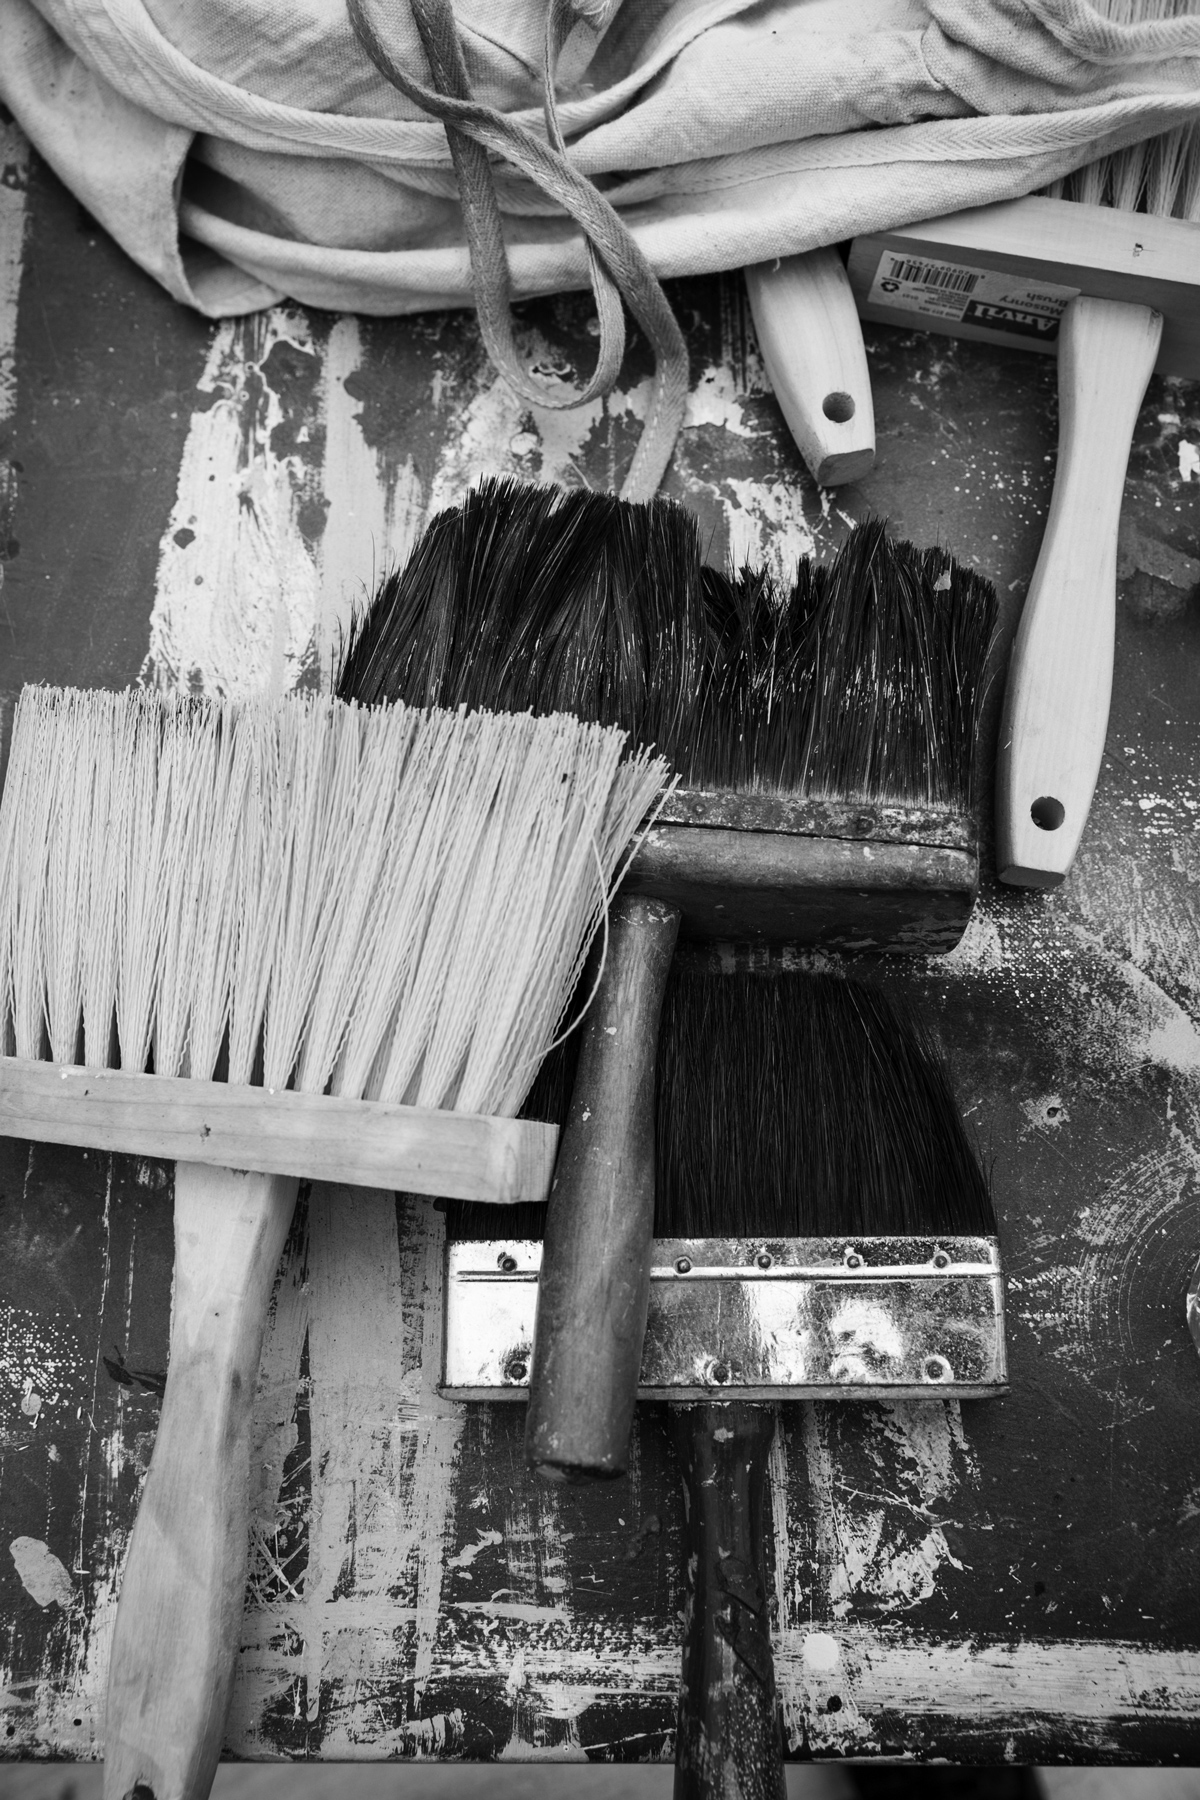 black and white photo of paintbrushes on a wooden surface